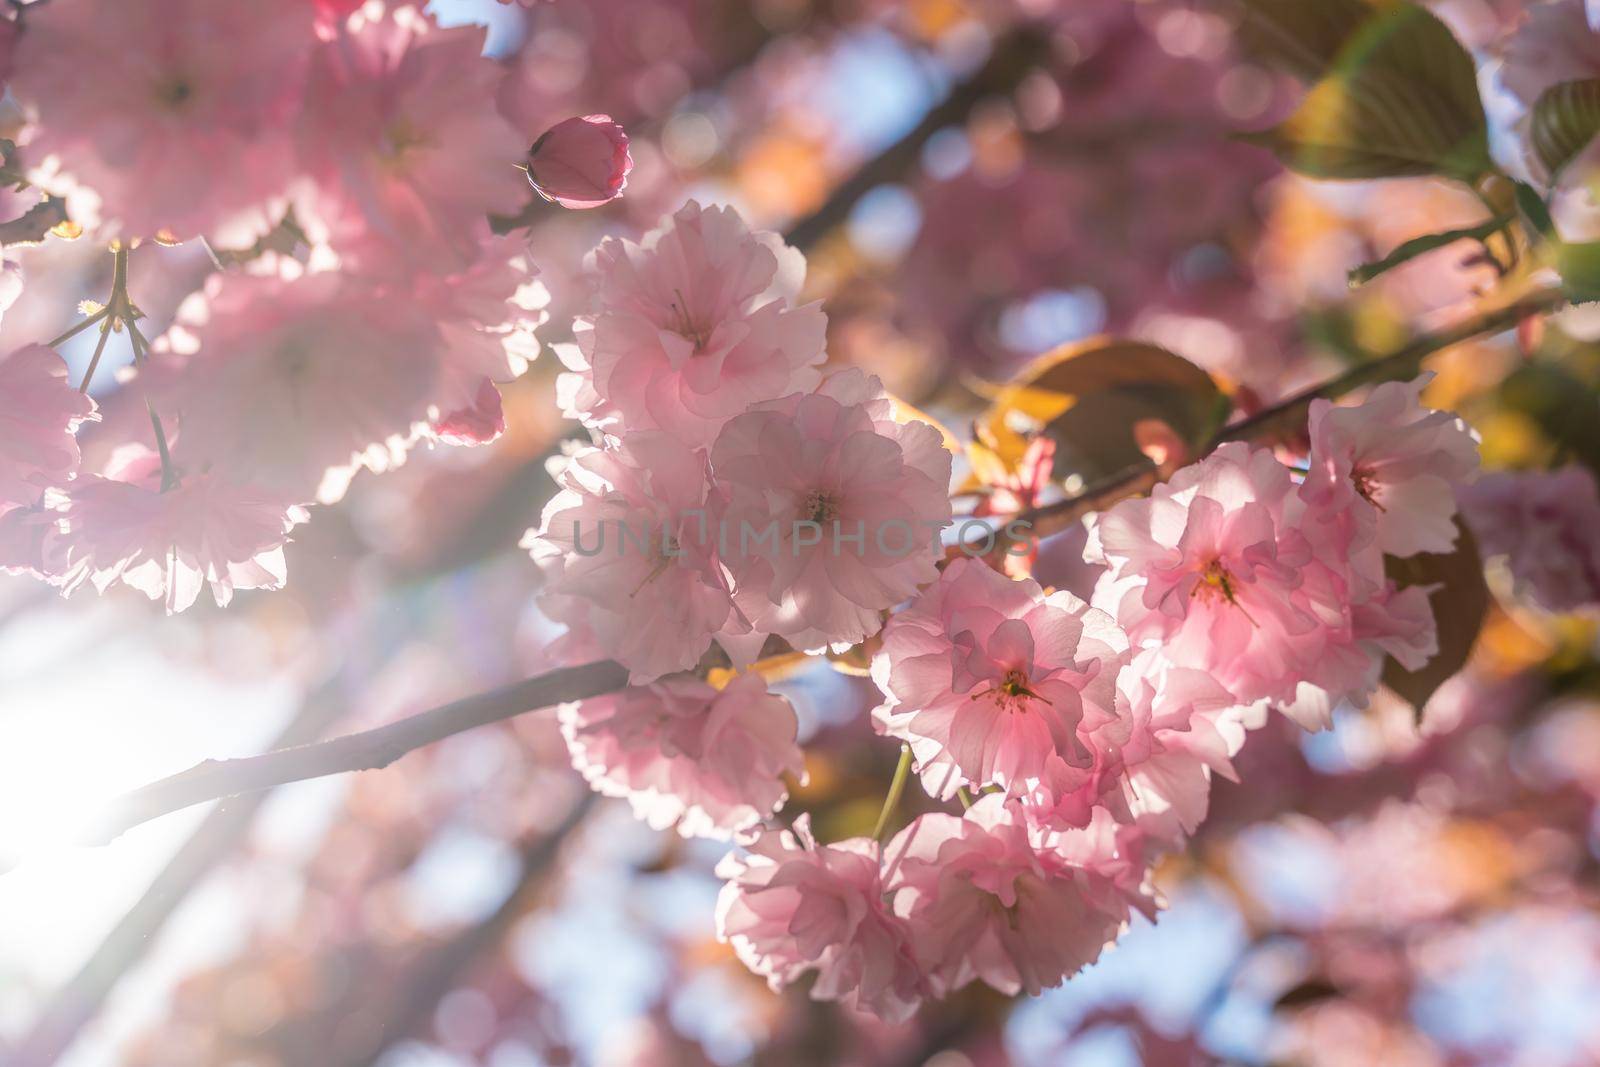 Double cherry blossoms in full bloom. A tree branch with flowers against a blue sky and the sun shines through the flowers